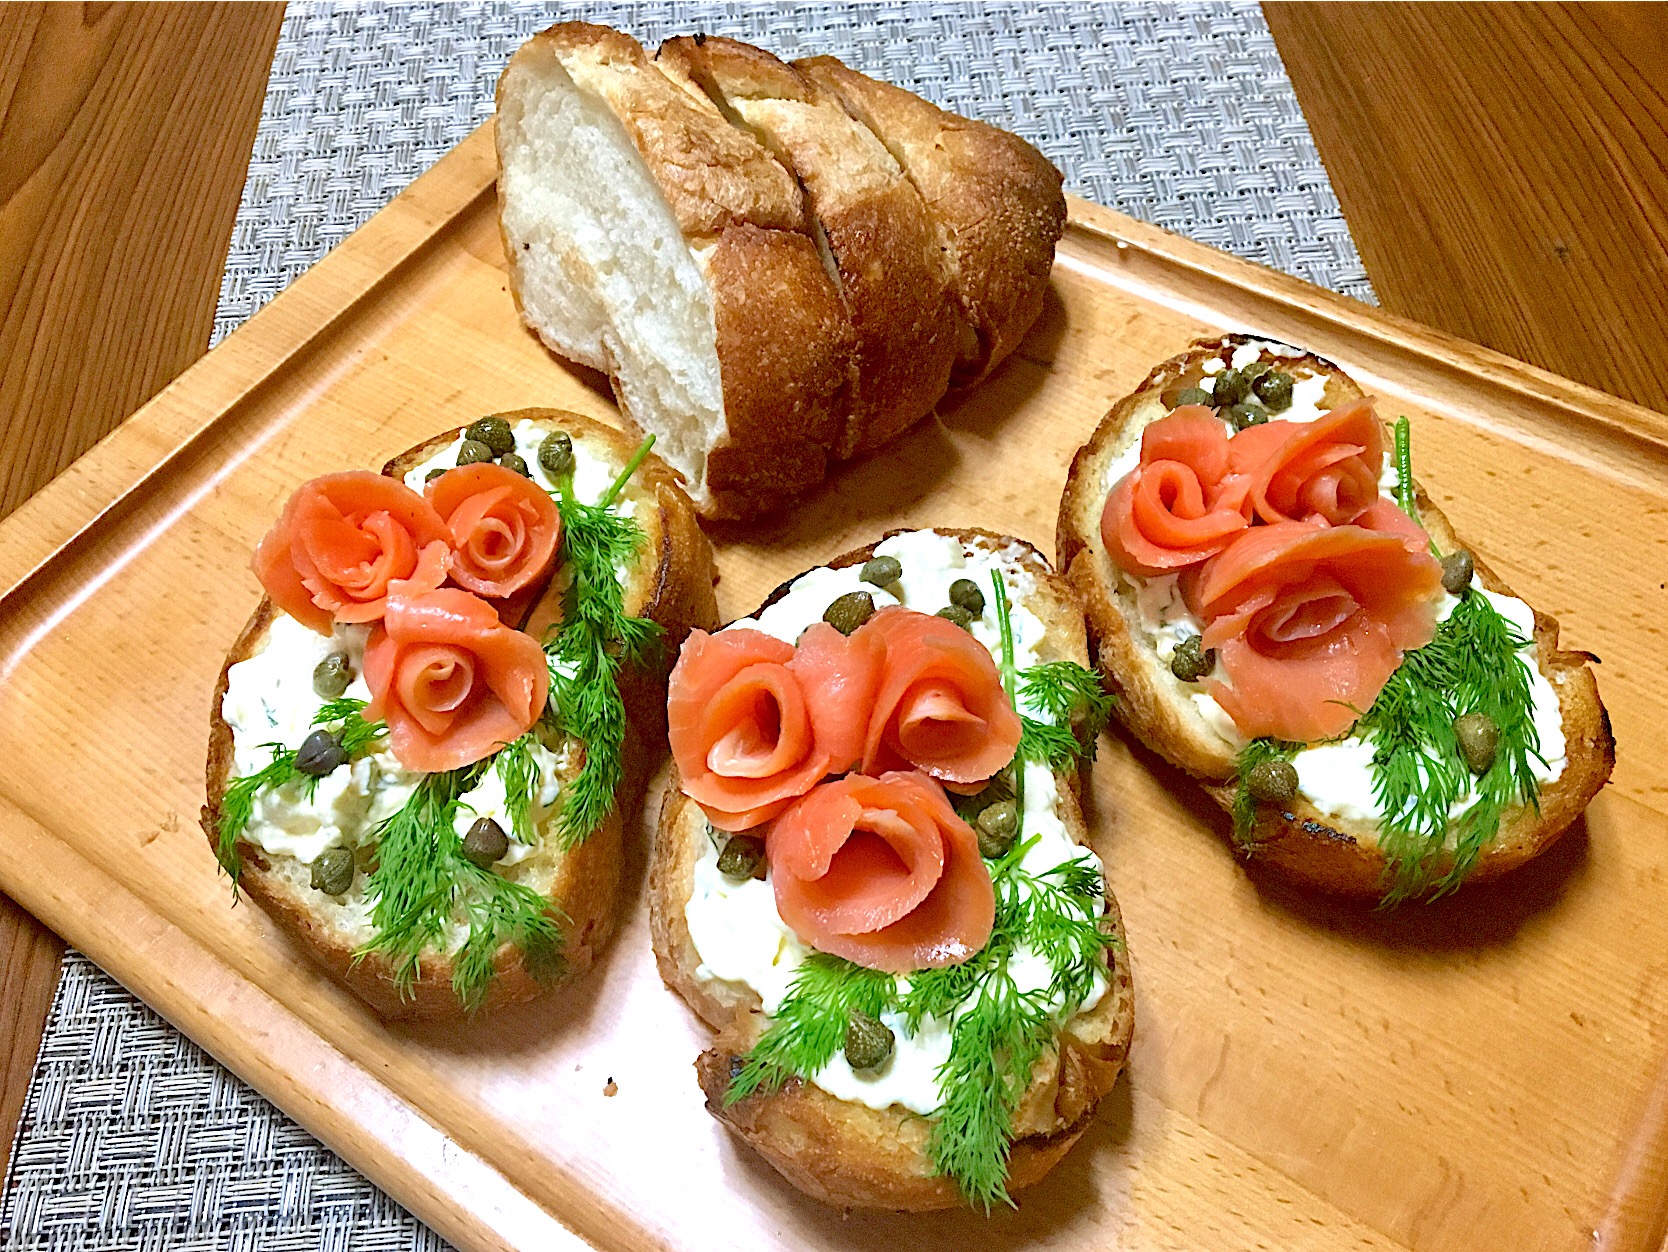 ✨SMOKED SALMONS,dill & capers with cream cheese on bruschetta...ブルスケッタにクリチ、スモークサーモン、ディル&ケイパー✨